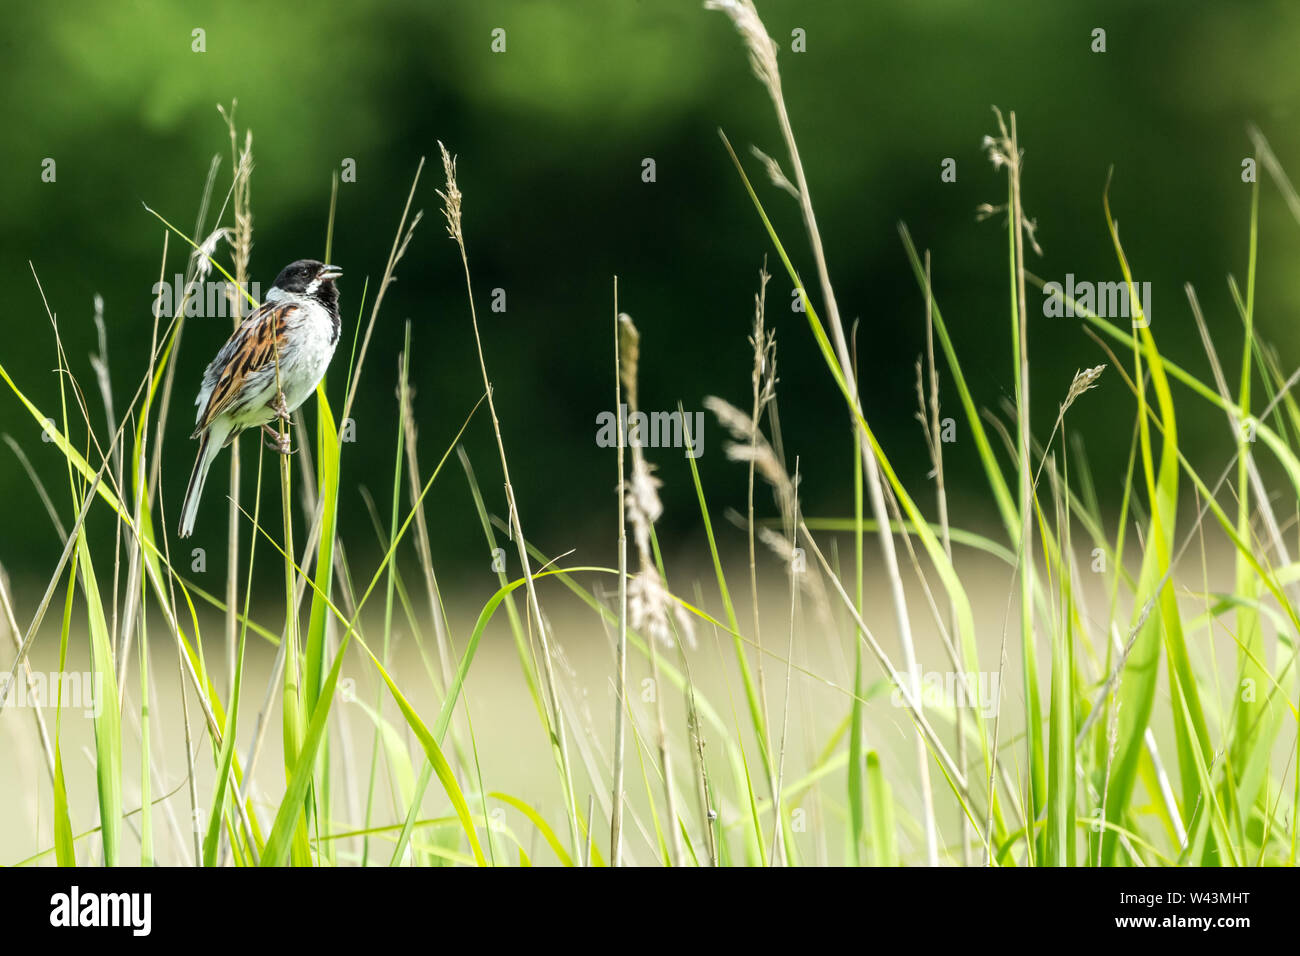 Reed Bunting, Scientific name: Emberiza schoeniclus, male Reed Bunting perched in natural habitat of grasses and reeds.  Facing right. Landscape Stock Photo